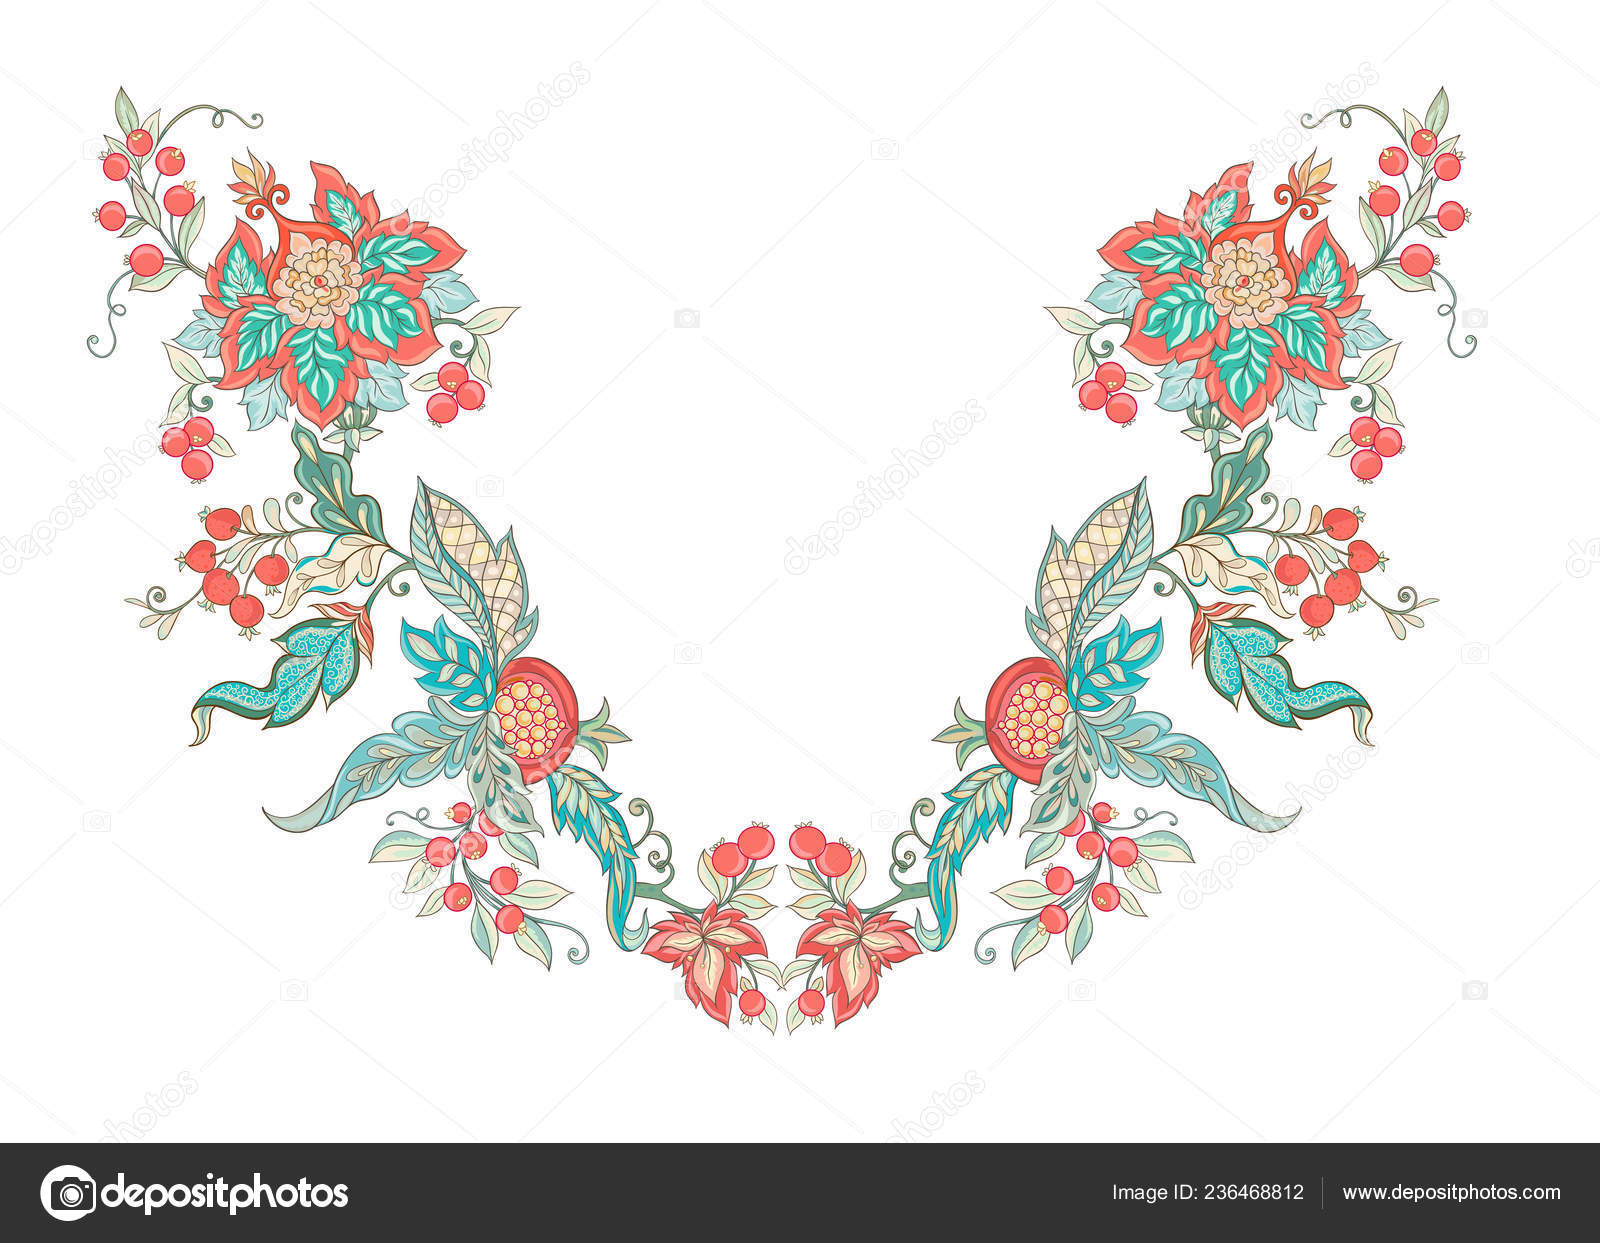 Jacobean Embroidery Patterns Free Floral Decorative Elements Jacobean Embroidery Style Fantasy Floral